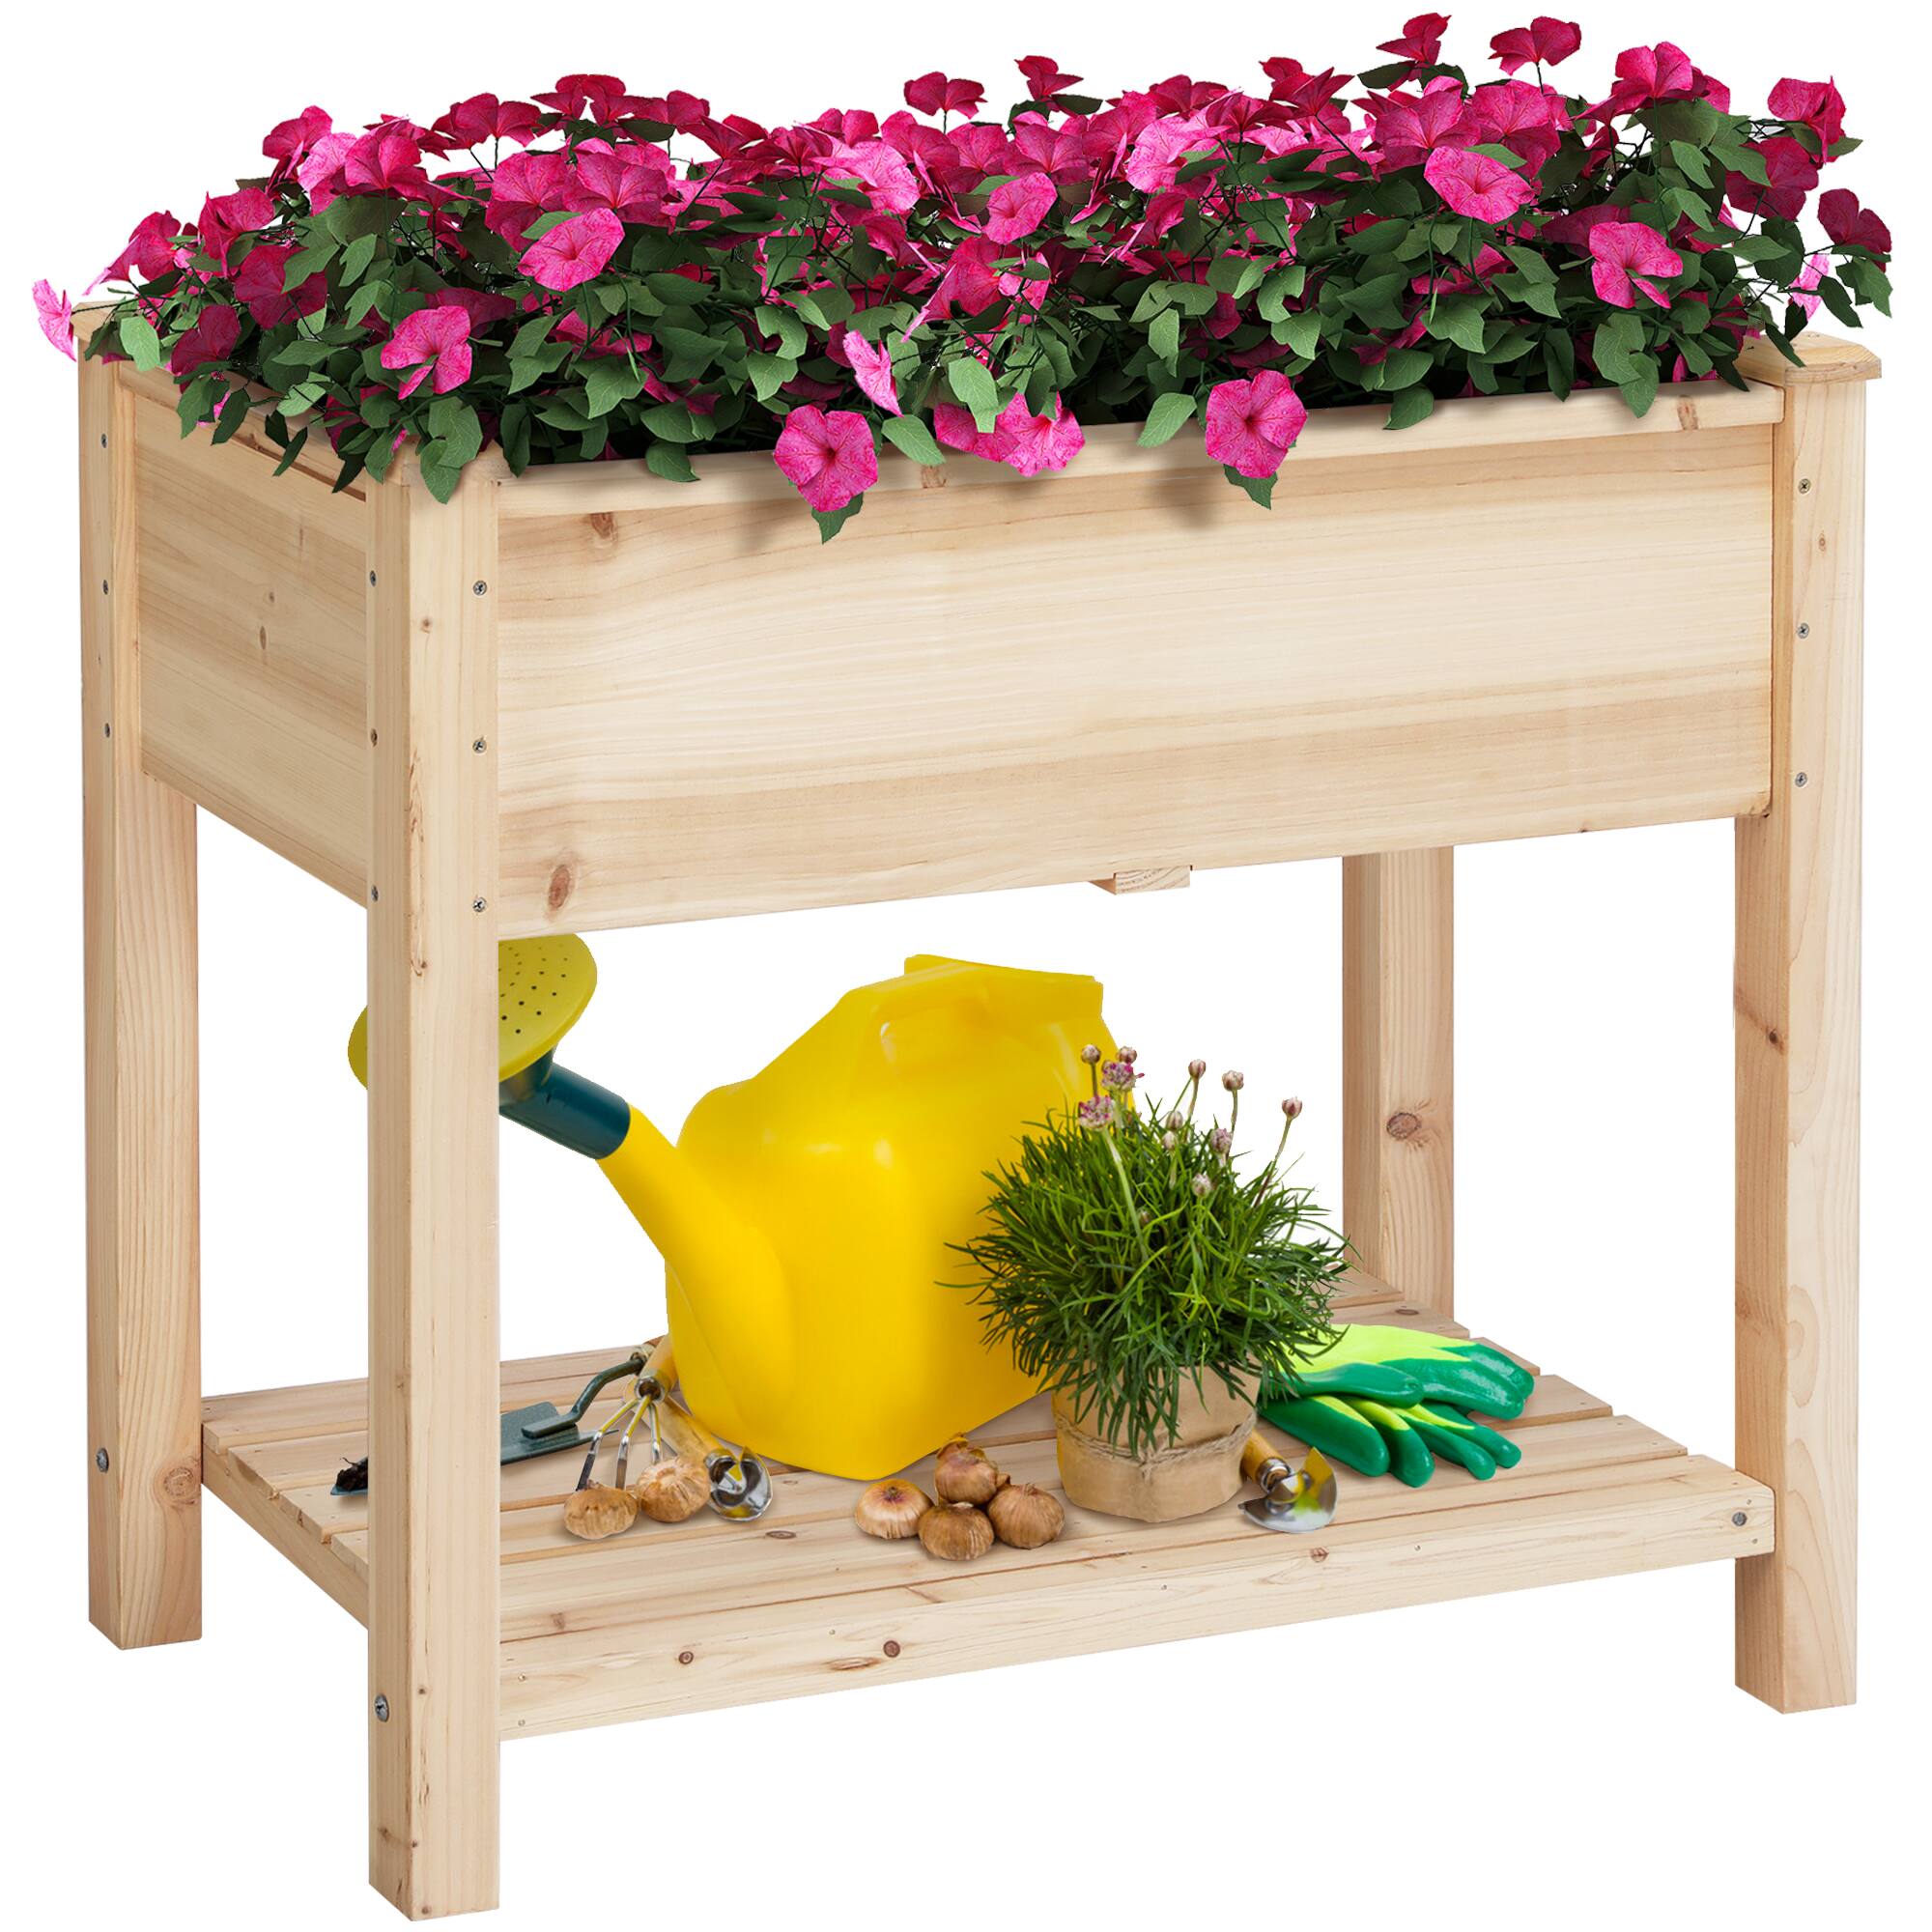 Wooden Raised Elevated Garden Planter Box Kit with Legs $68.98 + Free Shipping $69.98